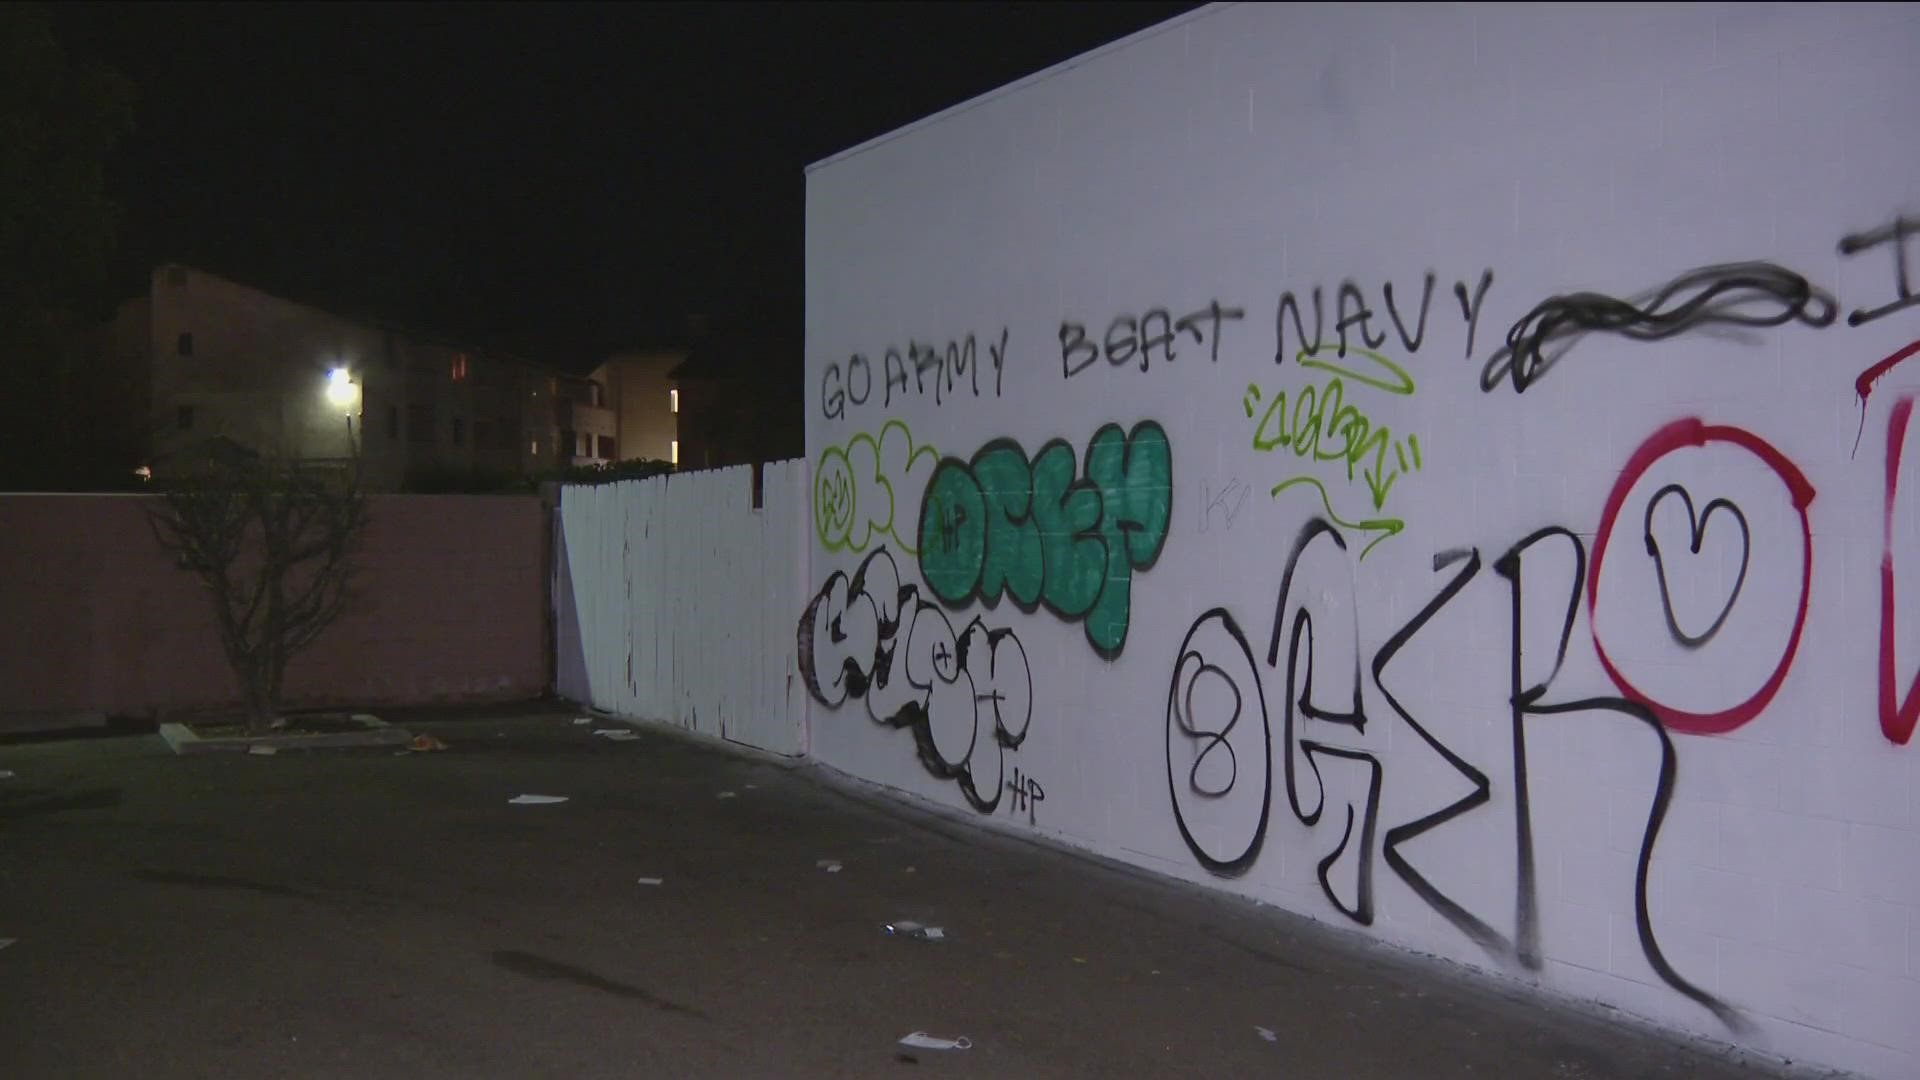 The ordinance upgrade that ends the cost burden of graffiti removal for unincorporated residents.